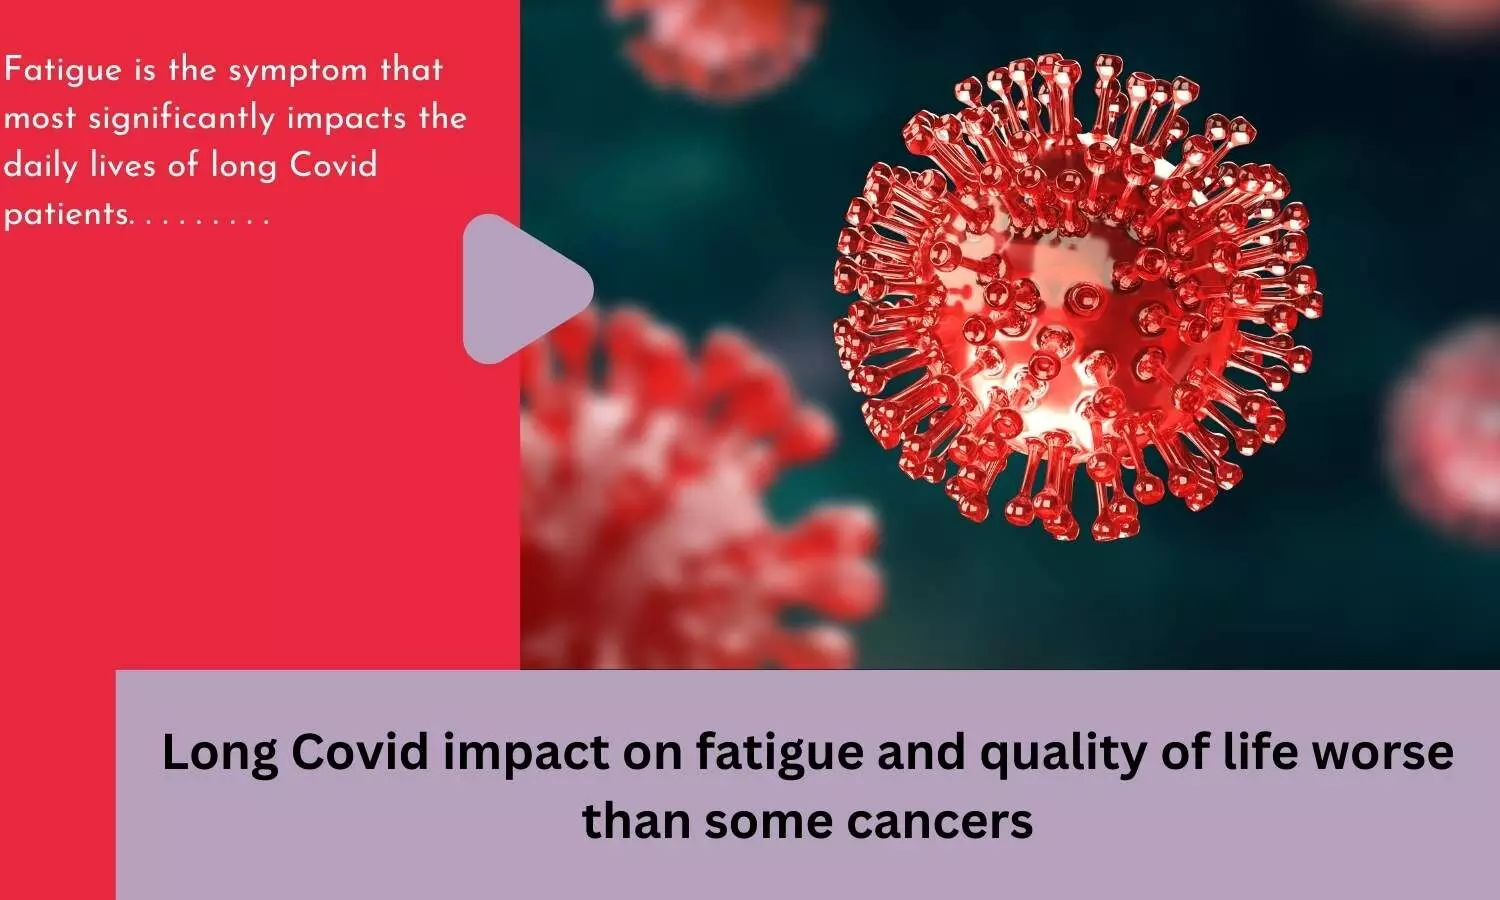 Long Covid impact on fatigue and quality of life worse than some cancers